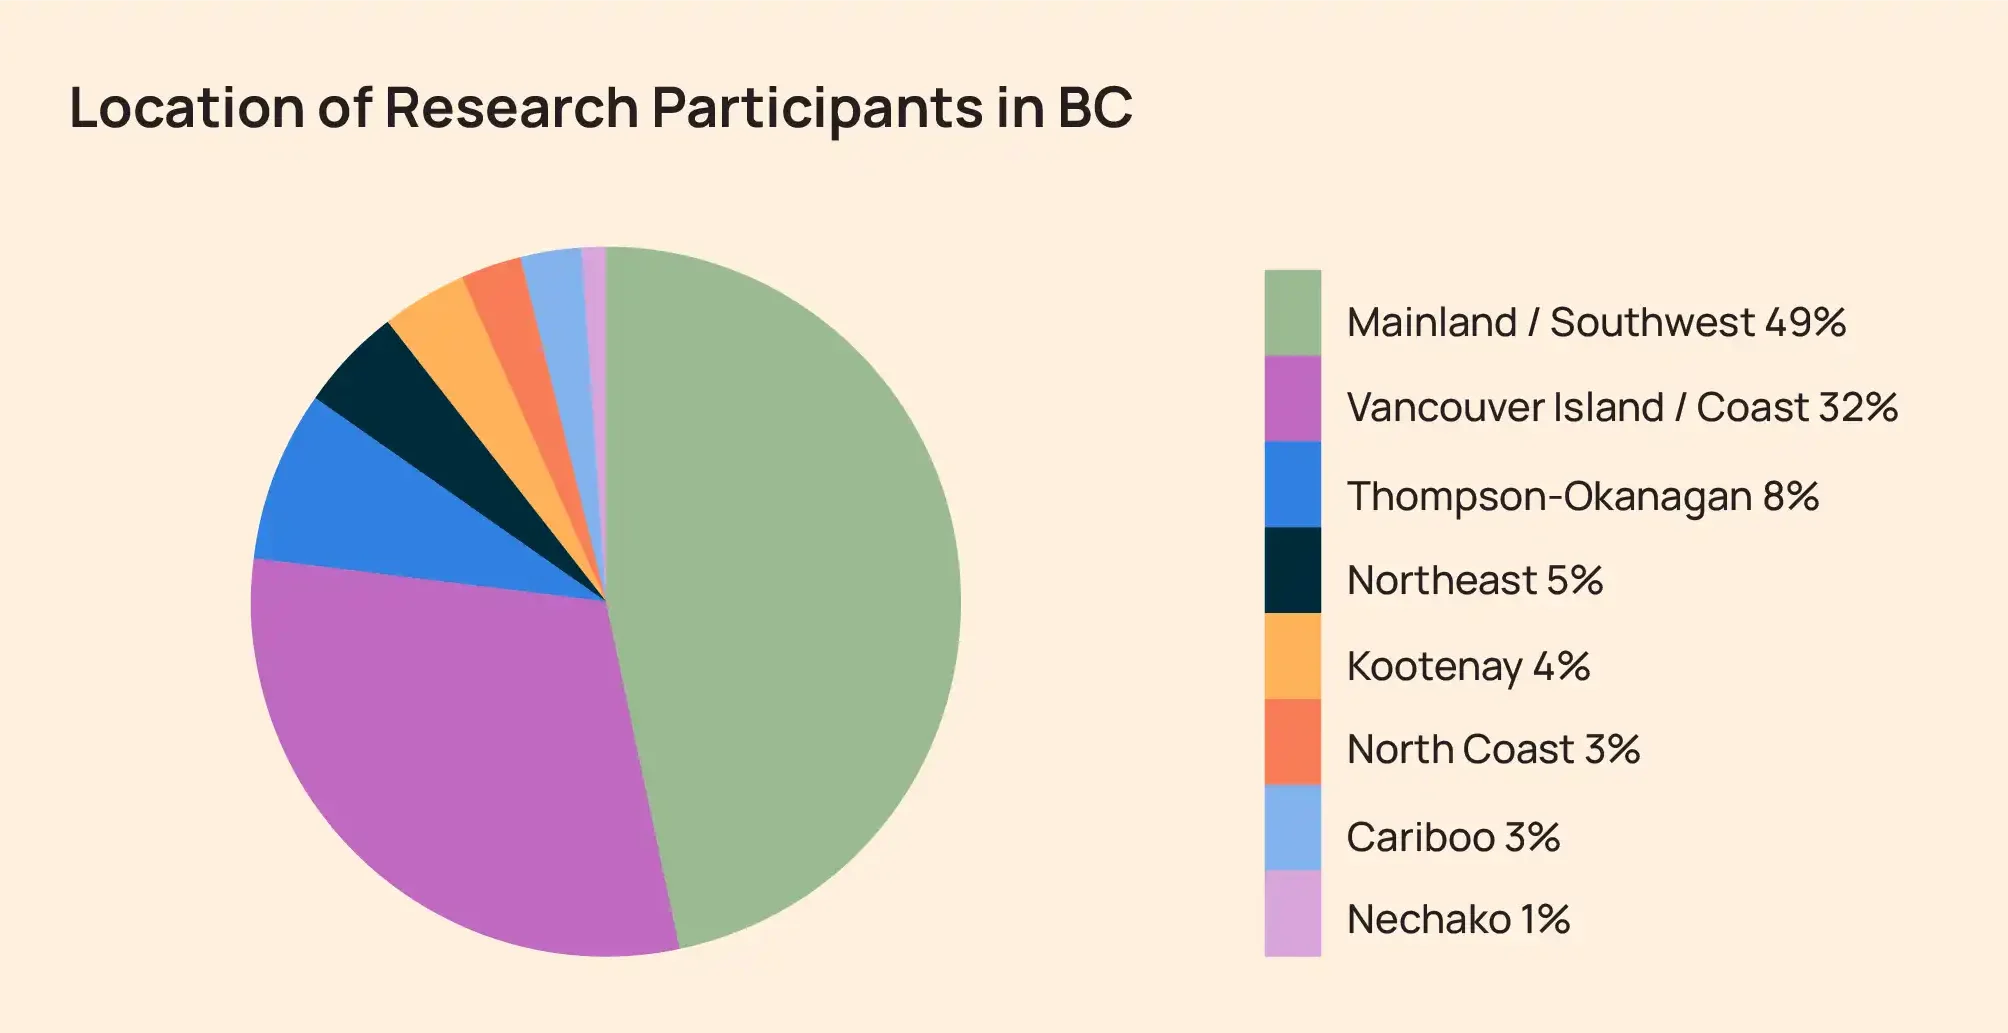 A chart showing the location of research participants in BC with 49 percent from the mainland southwest region.